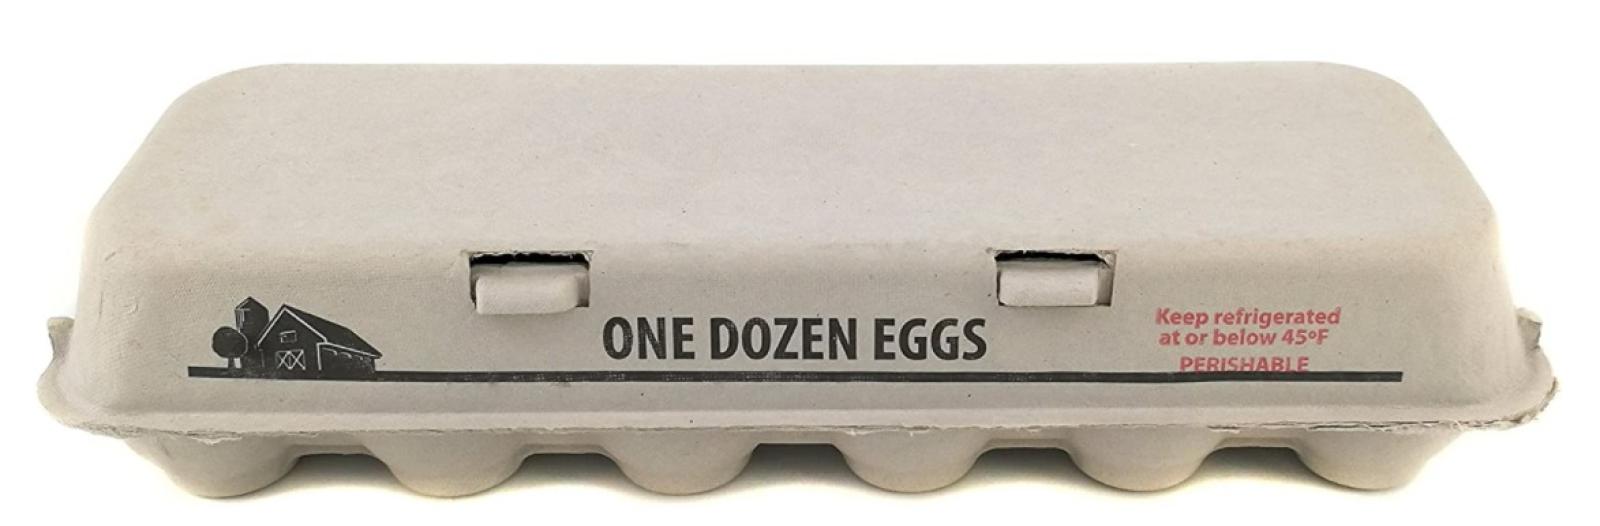 Little Giant Solid Top Egg Carton